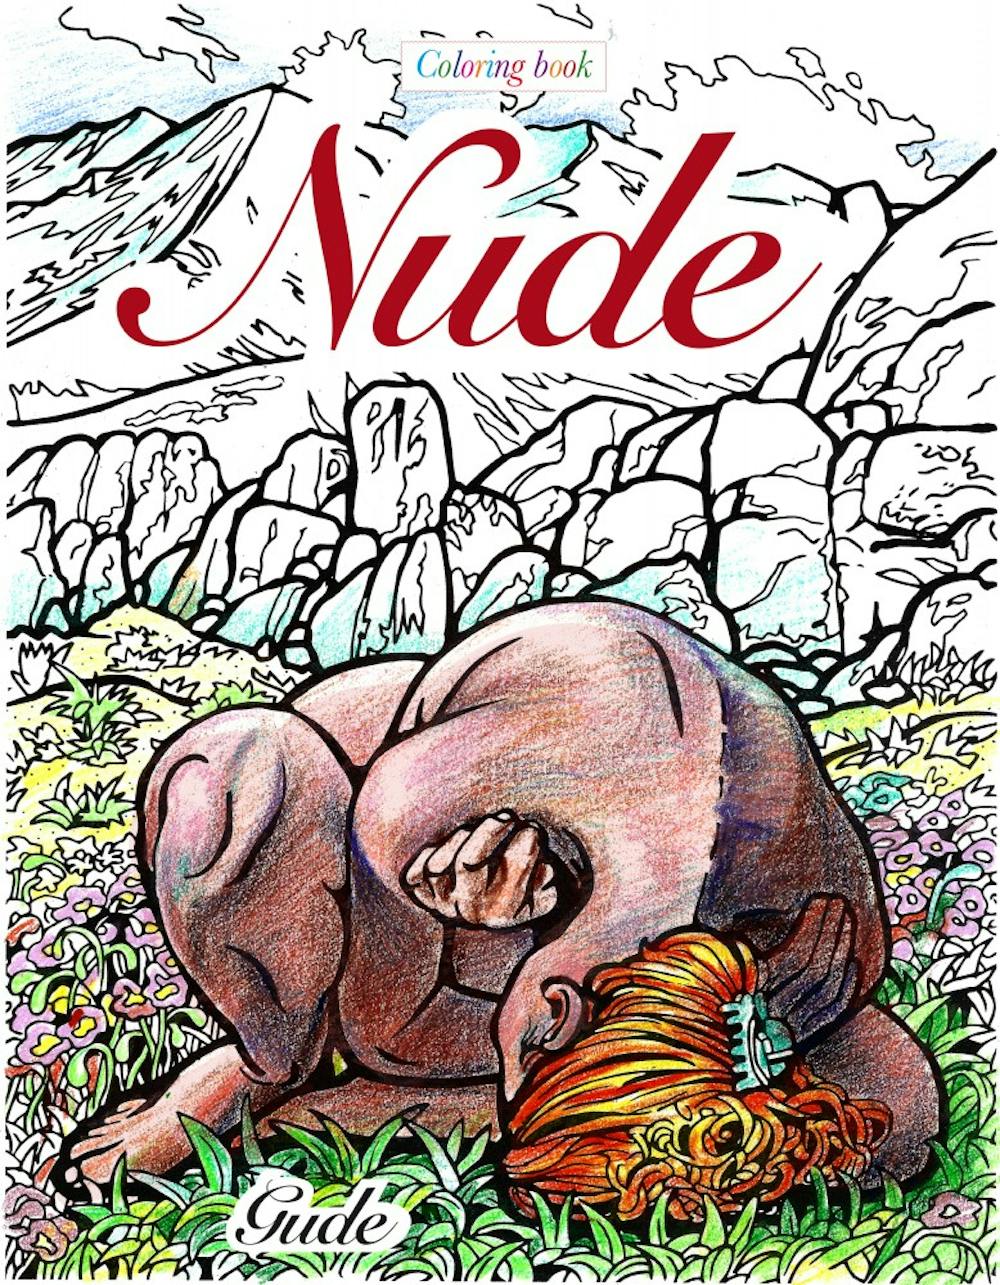 <p>The cover of Nude by Karl Gude is shown. Courtesy of Karl Gude&nbsp;</p>